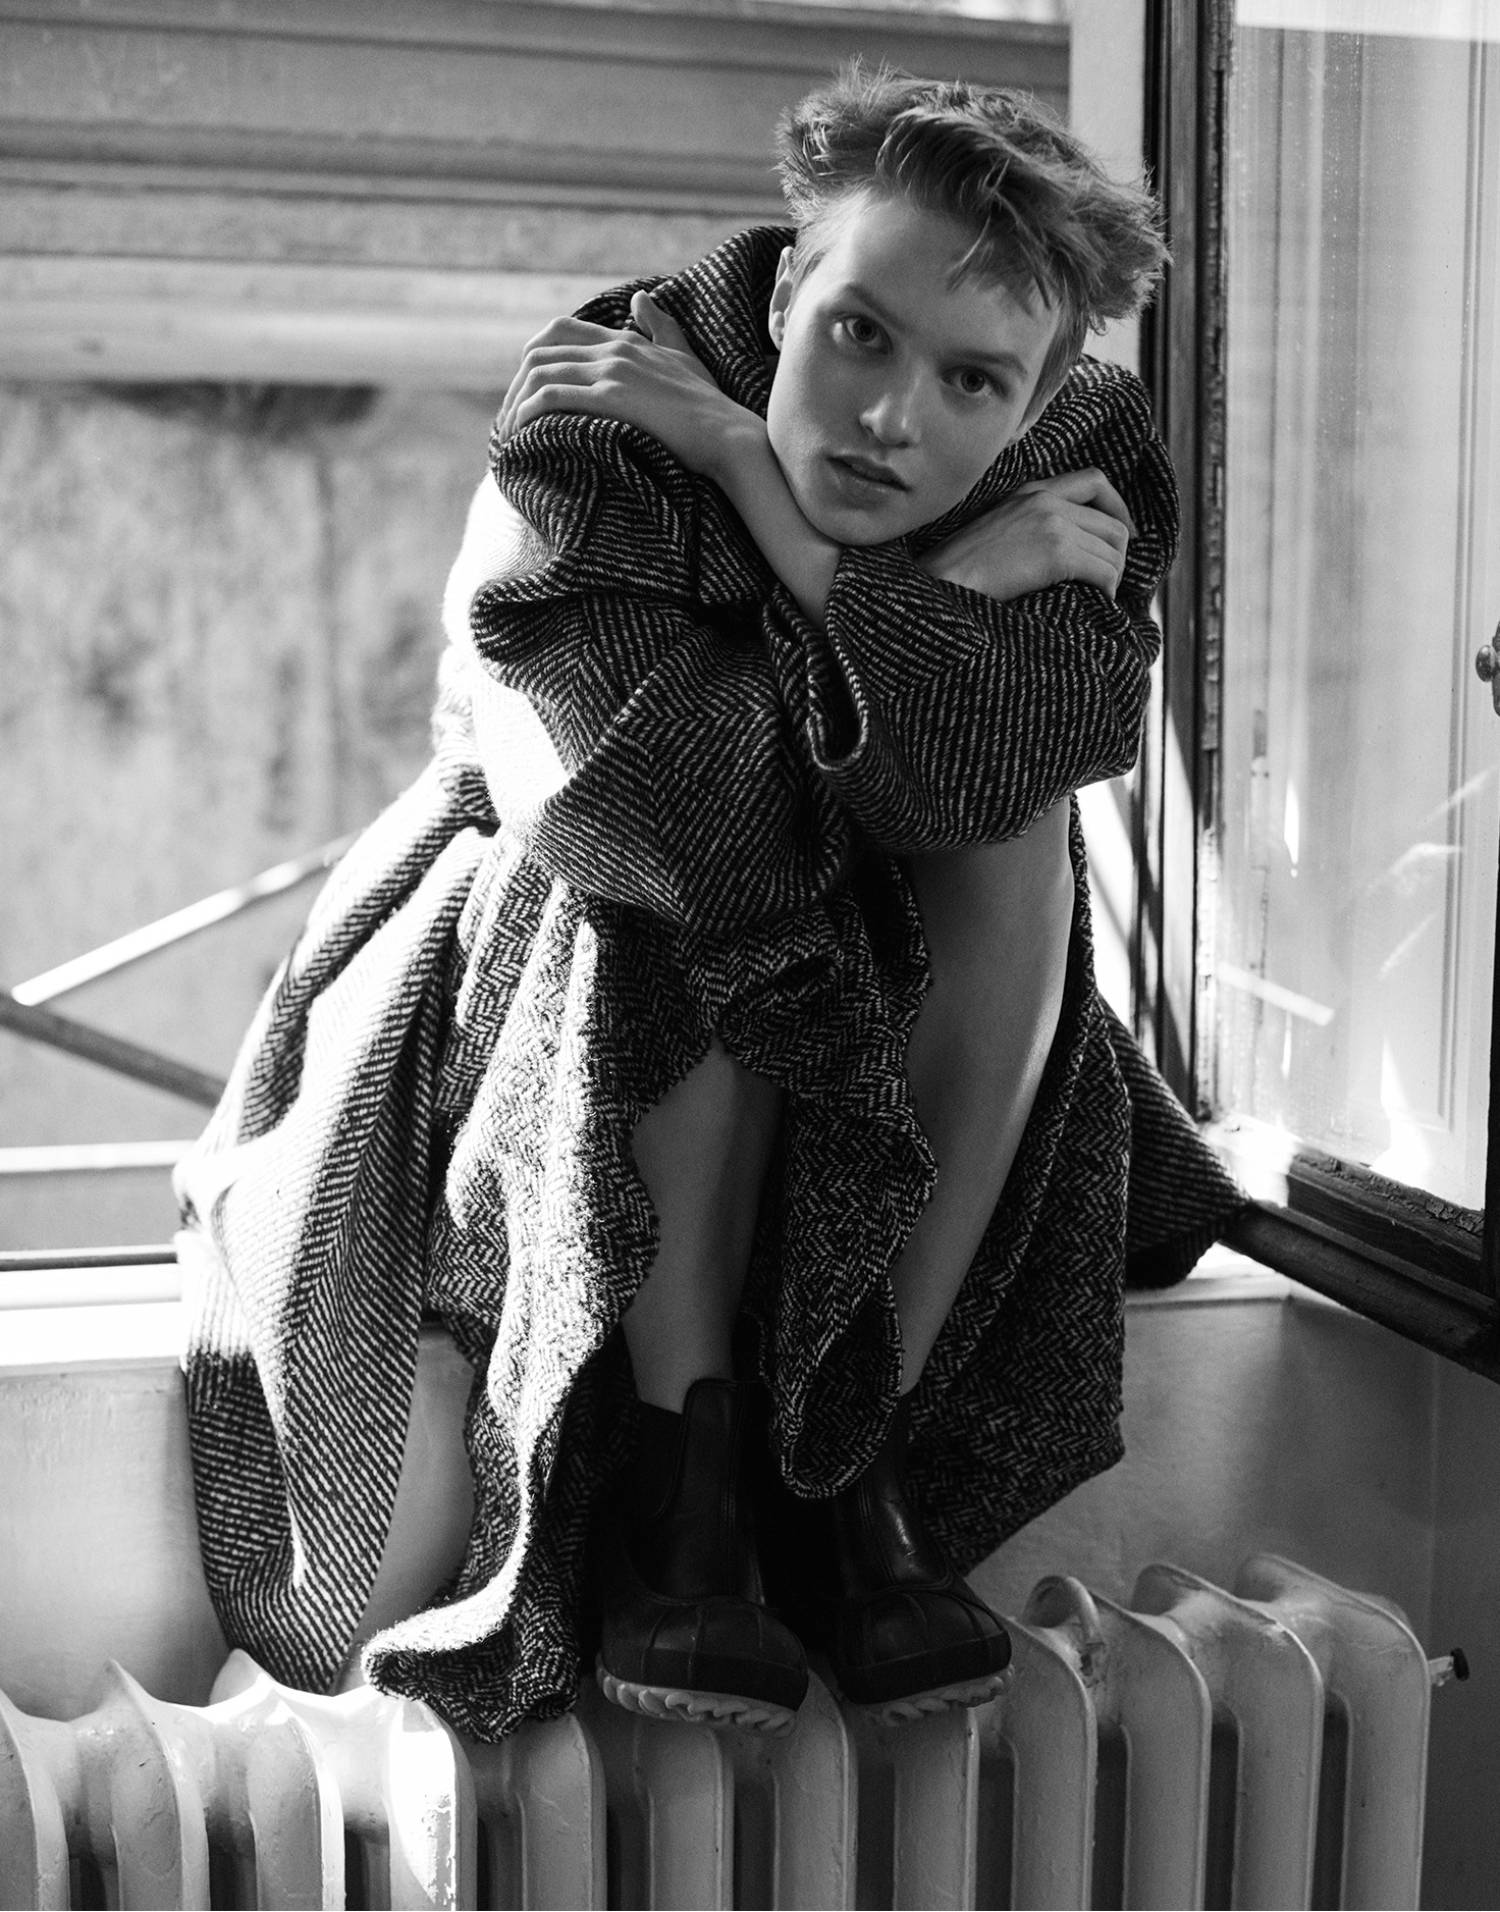 Sofia Hansson by Stefano Galuzzi for Marie Claire Italia November 2021 Clothing & Accessories: Chevron coat and full skirt in herringbone tweed by Alessandro Dell'Acqua x Elena Miro; Faux leather ankle boots by Stella McCartney